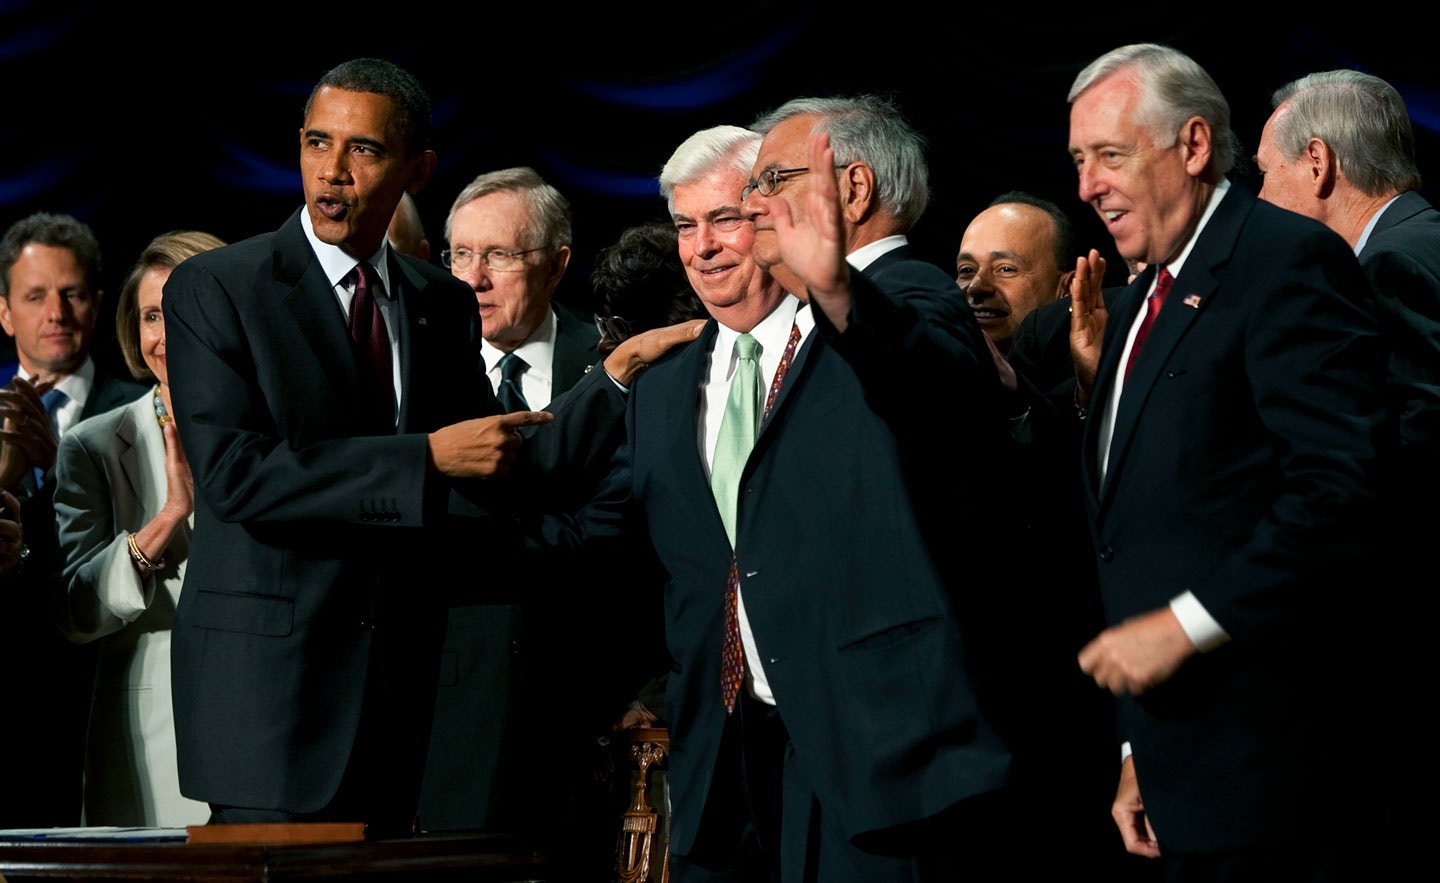 FILE -- President Barack Obama with  Sen. Christopher Dodd (D-Conn.), center, and Rep. Barney Frank (D-Mass.), center right, after signing the Dodd-Frank Act in Washington, July 21, 2010. Three judges at Washington's federal appeals court on Oct. 24, 2016, questioned the government's analysis that led to MetLife's designation as a "too big to fail" financial company, as the Justice Department appeals a lower court's decision to strip the insurance giant of that label. (Doug Mills/The New York Times)